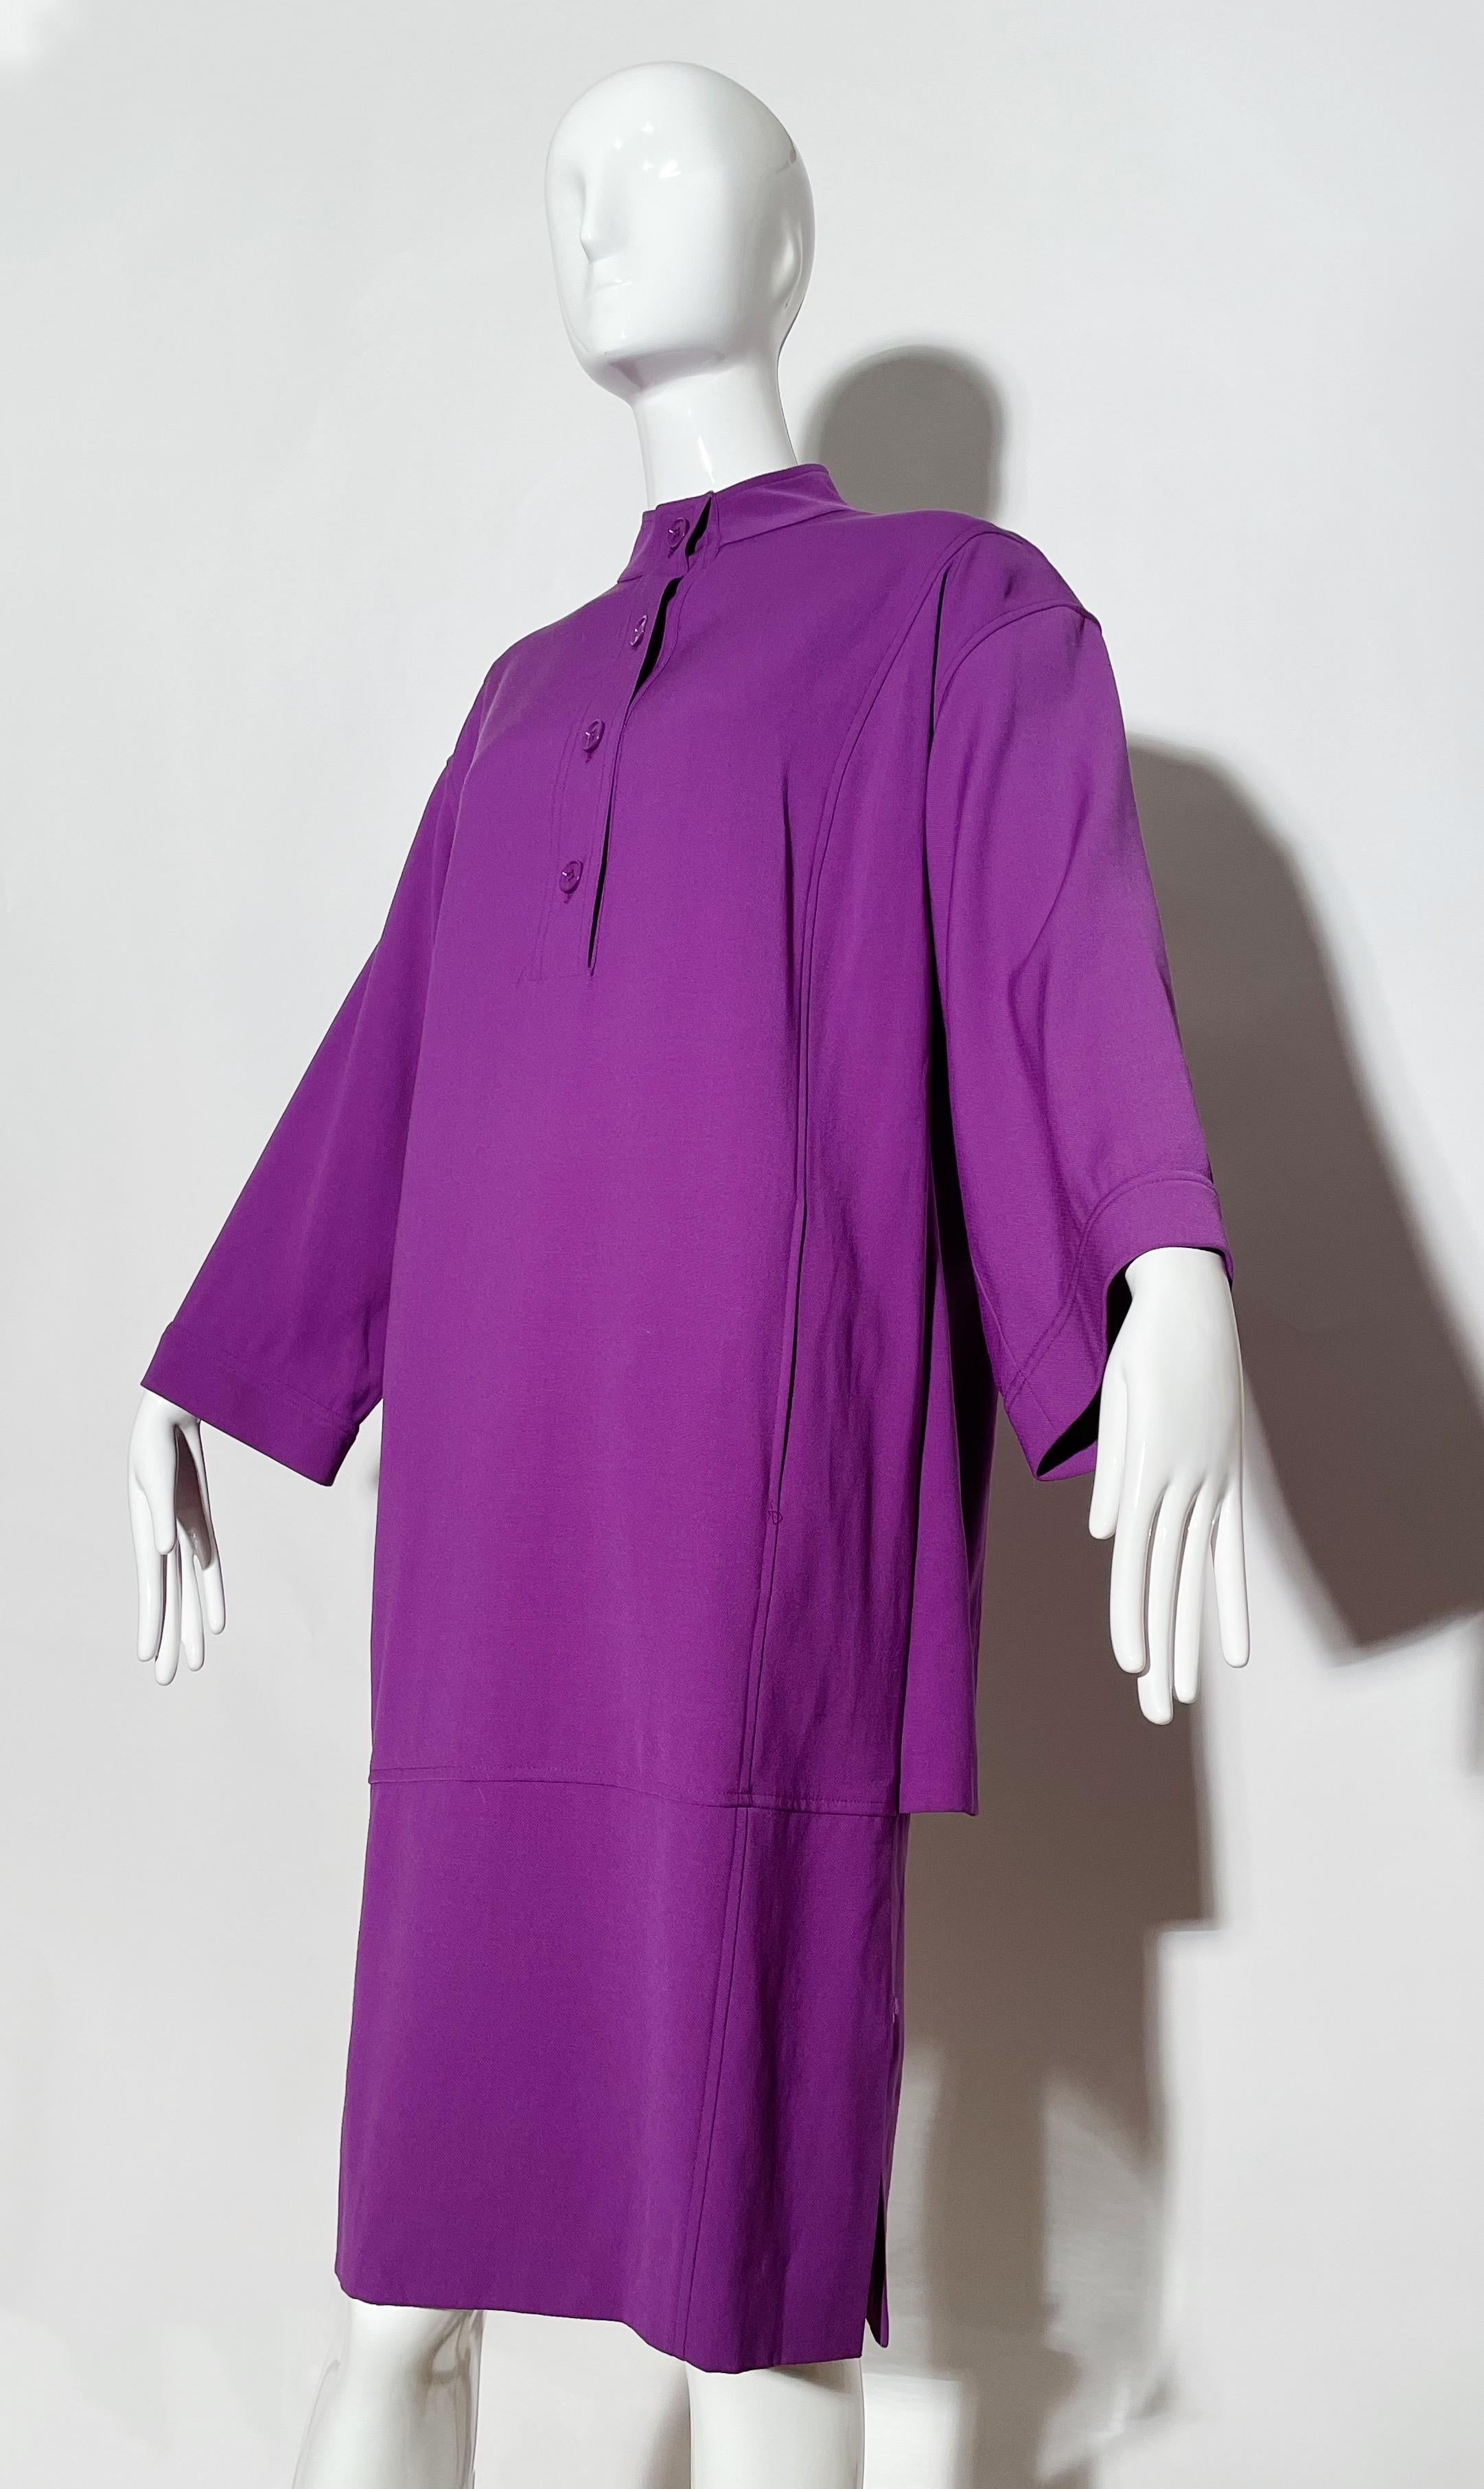 Gianfranco Ferre Tunic Dress In Good Condition For Sale In Los Angeles, CA